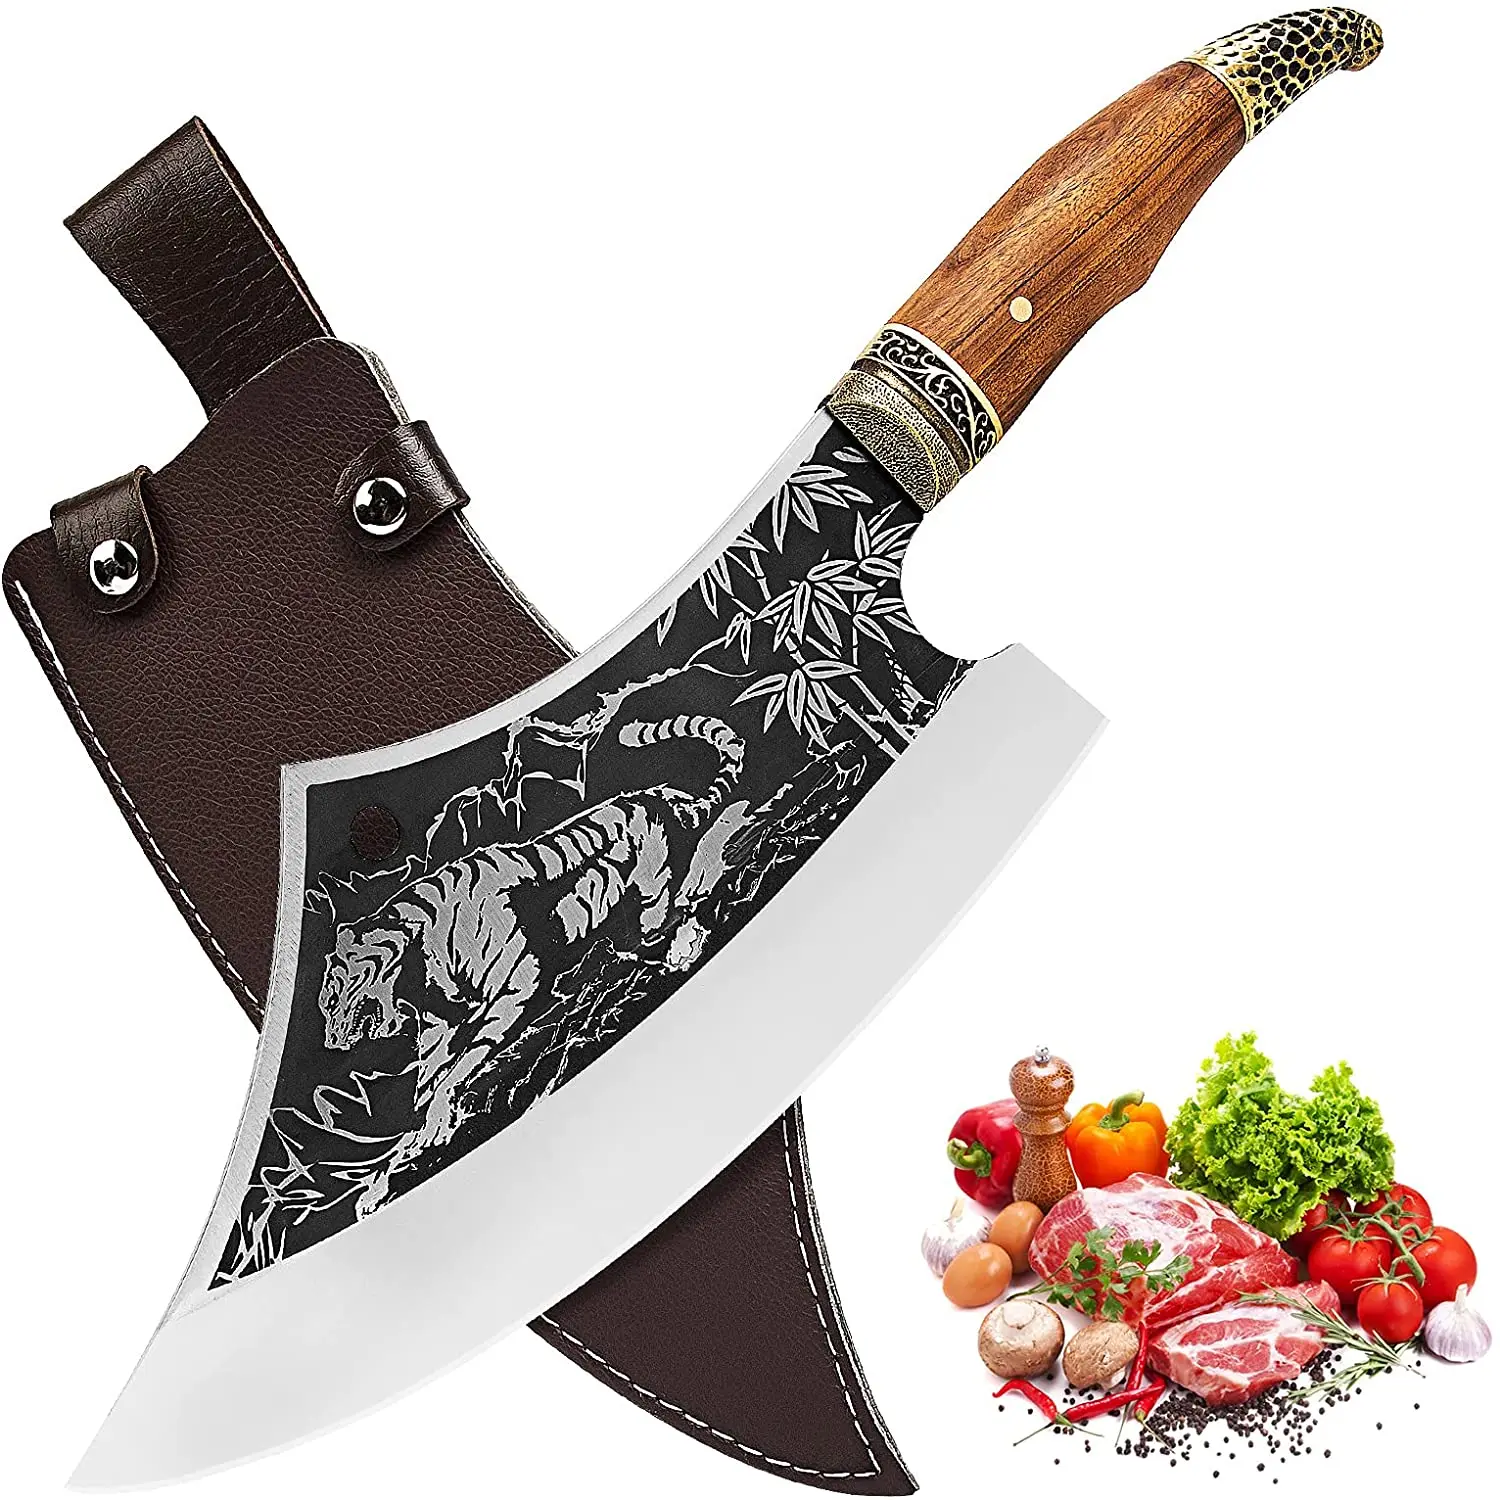 Forging Kitchen Boning Knife Professional Handmade Steel Kitchen Chef Butcher Knives Slicing Chopping Utility Cleaver Cooking